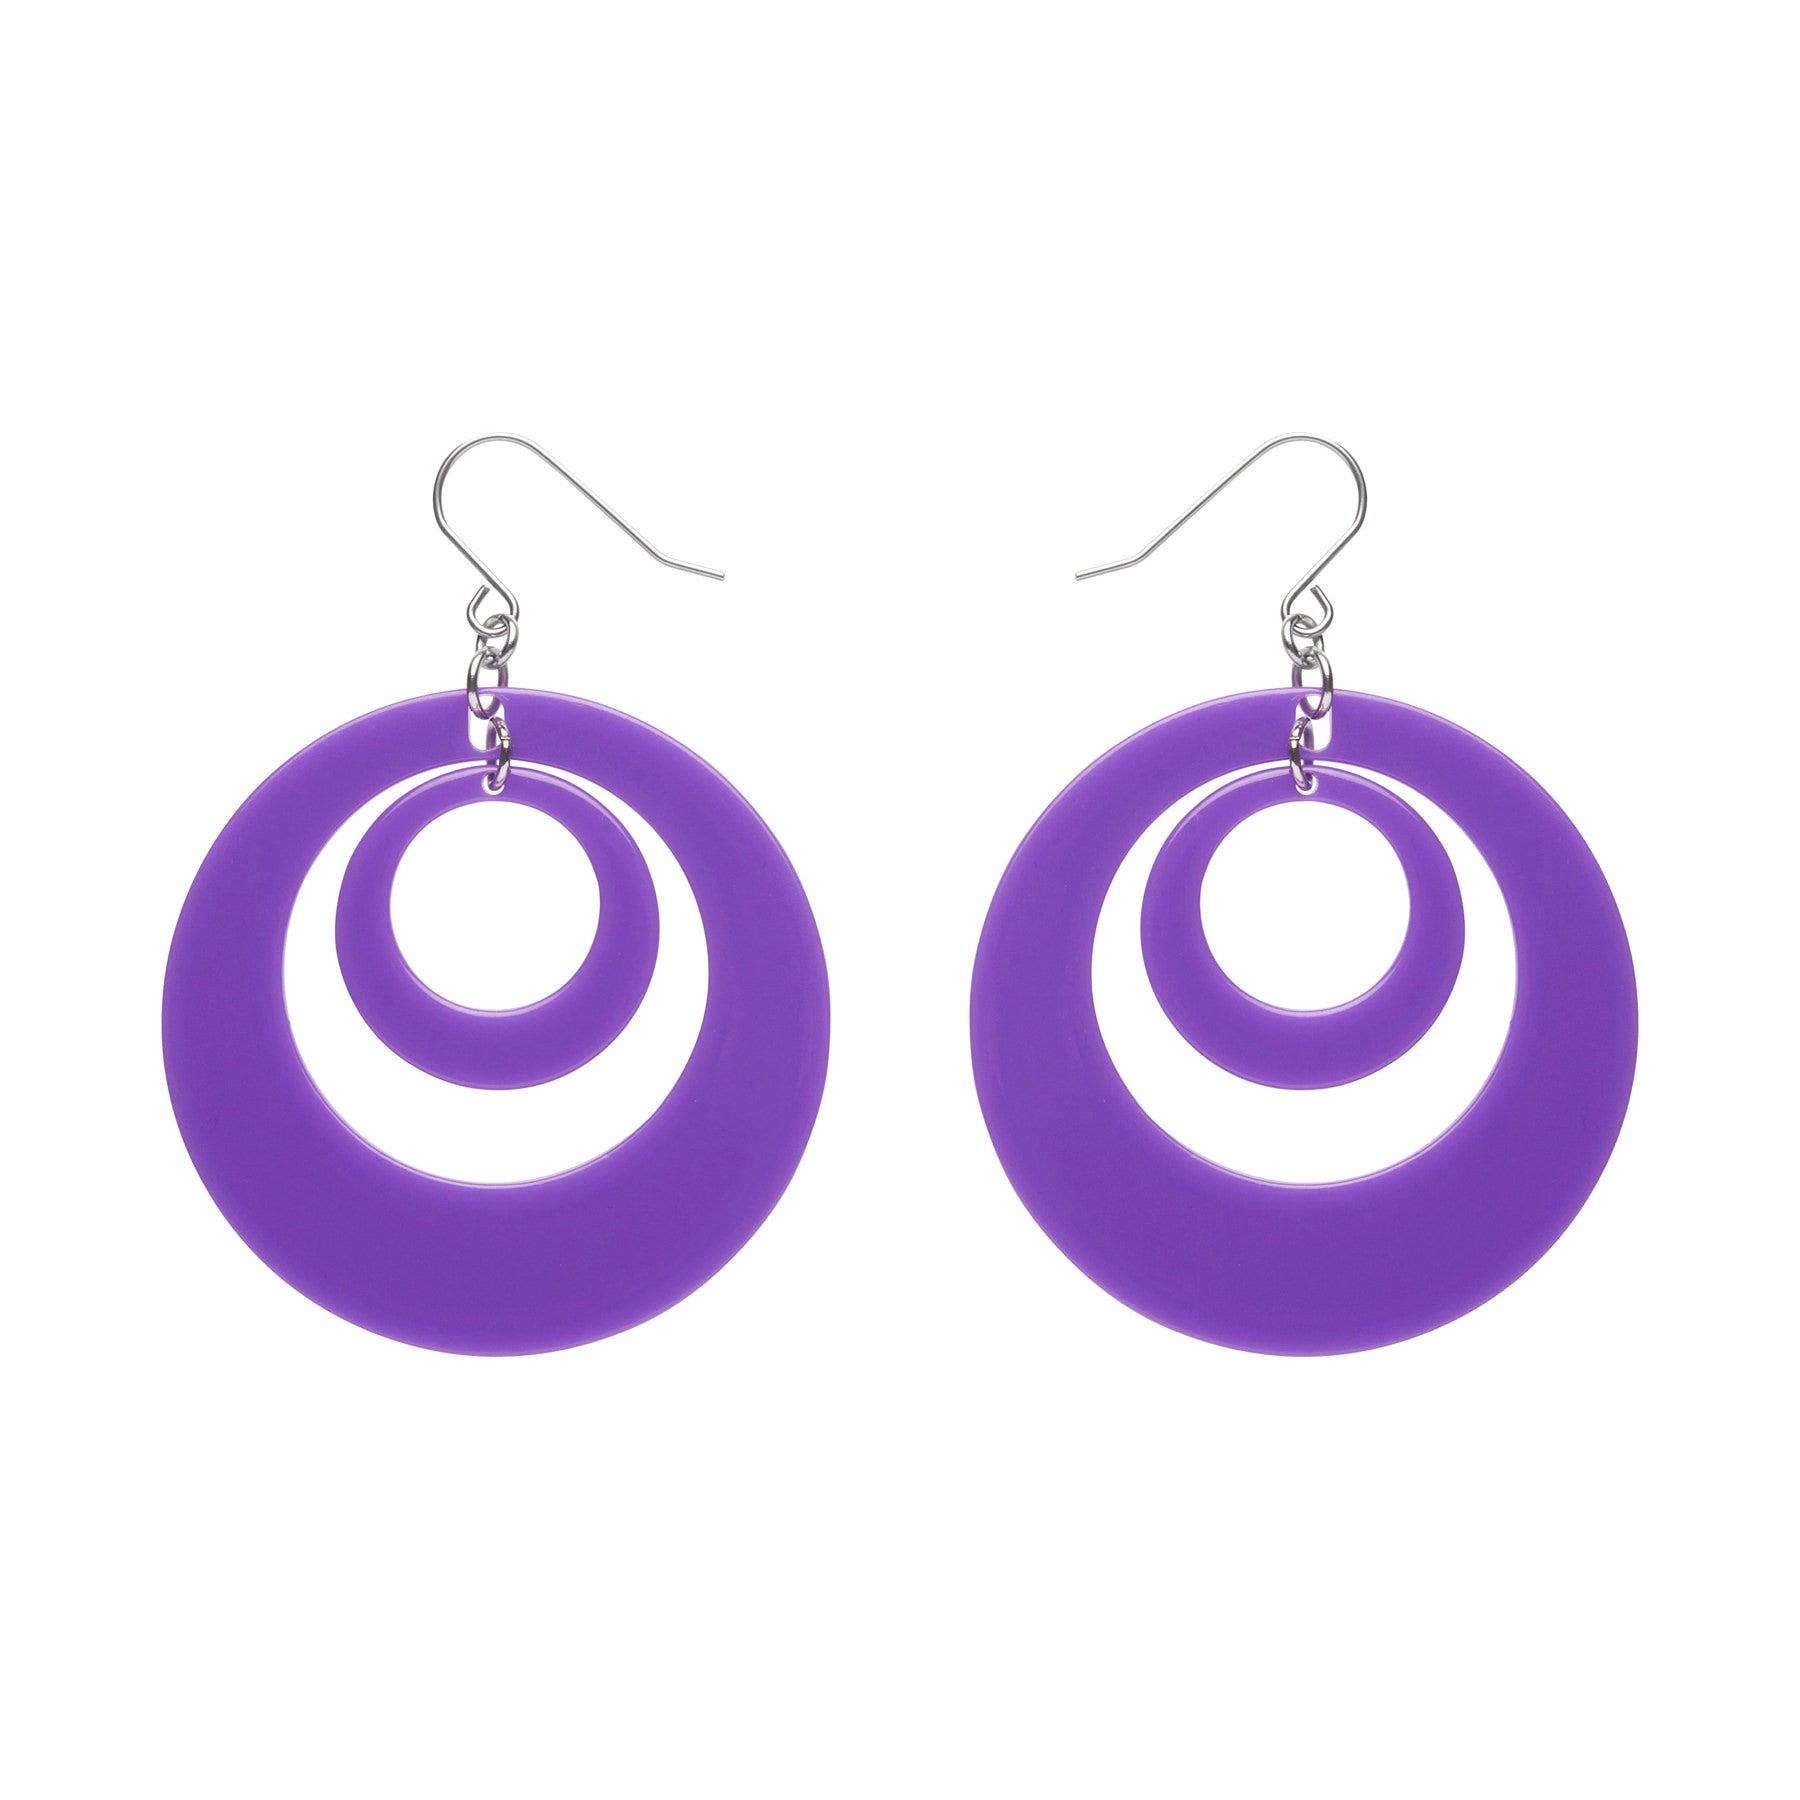 Mission to the Moon Collection double drop hoop dangle earrings in purple 100% Acrylic resin